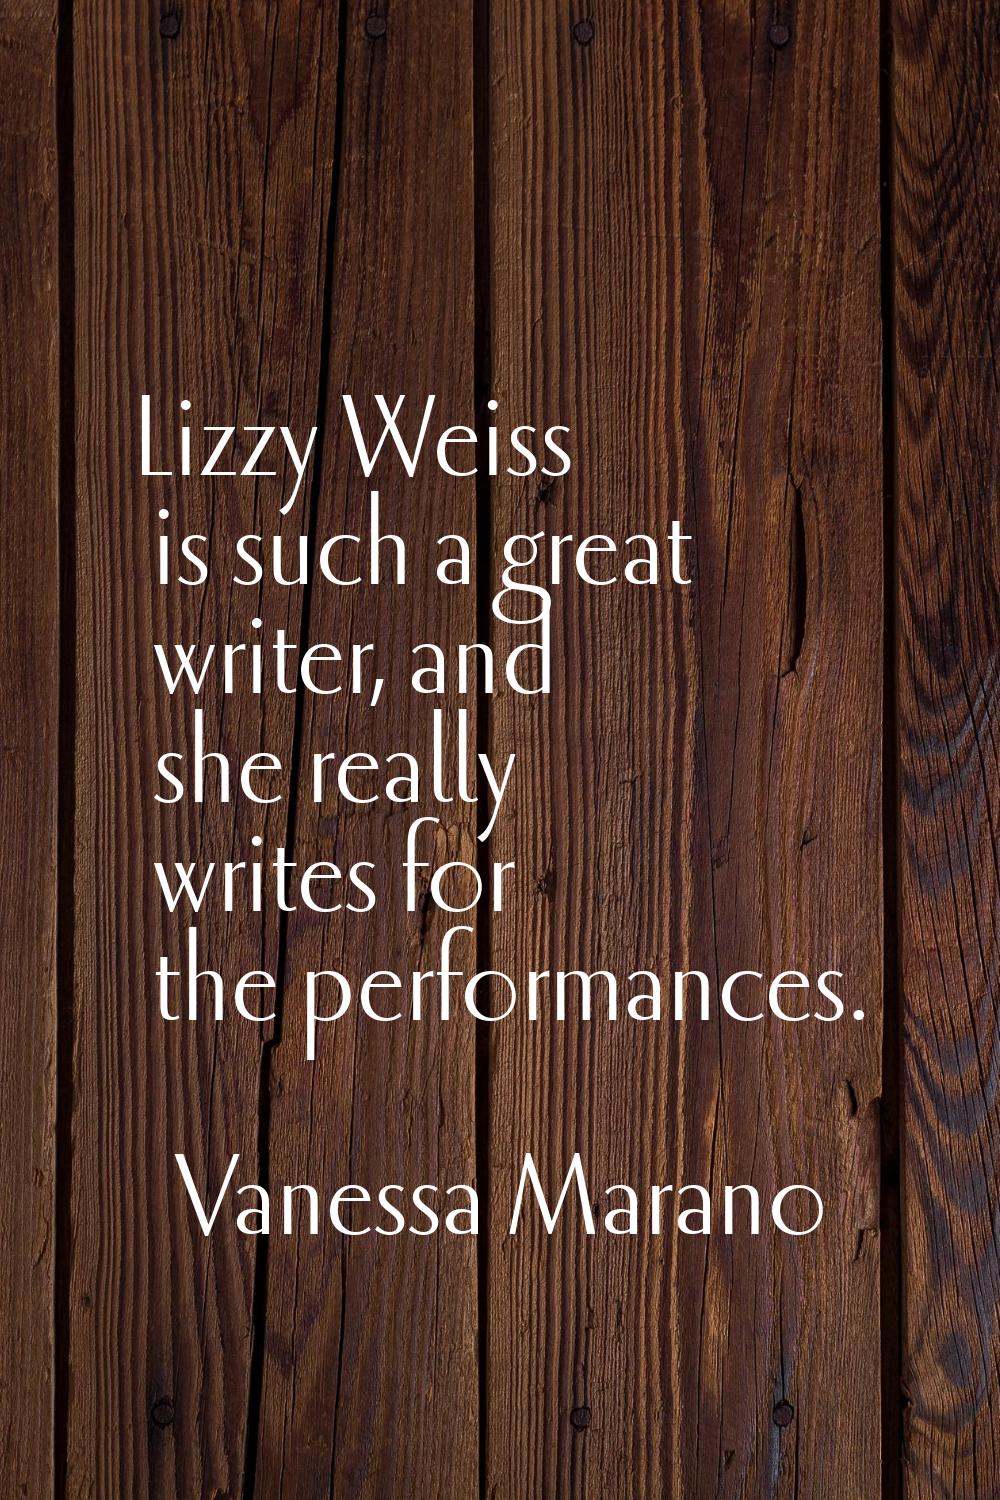 Lizzy Weiss is such a great writer, and she really writes for the performances.